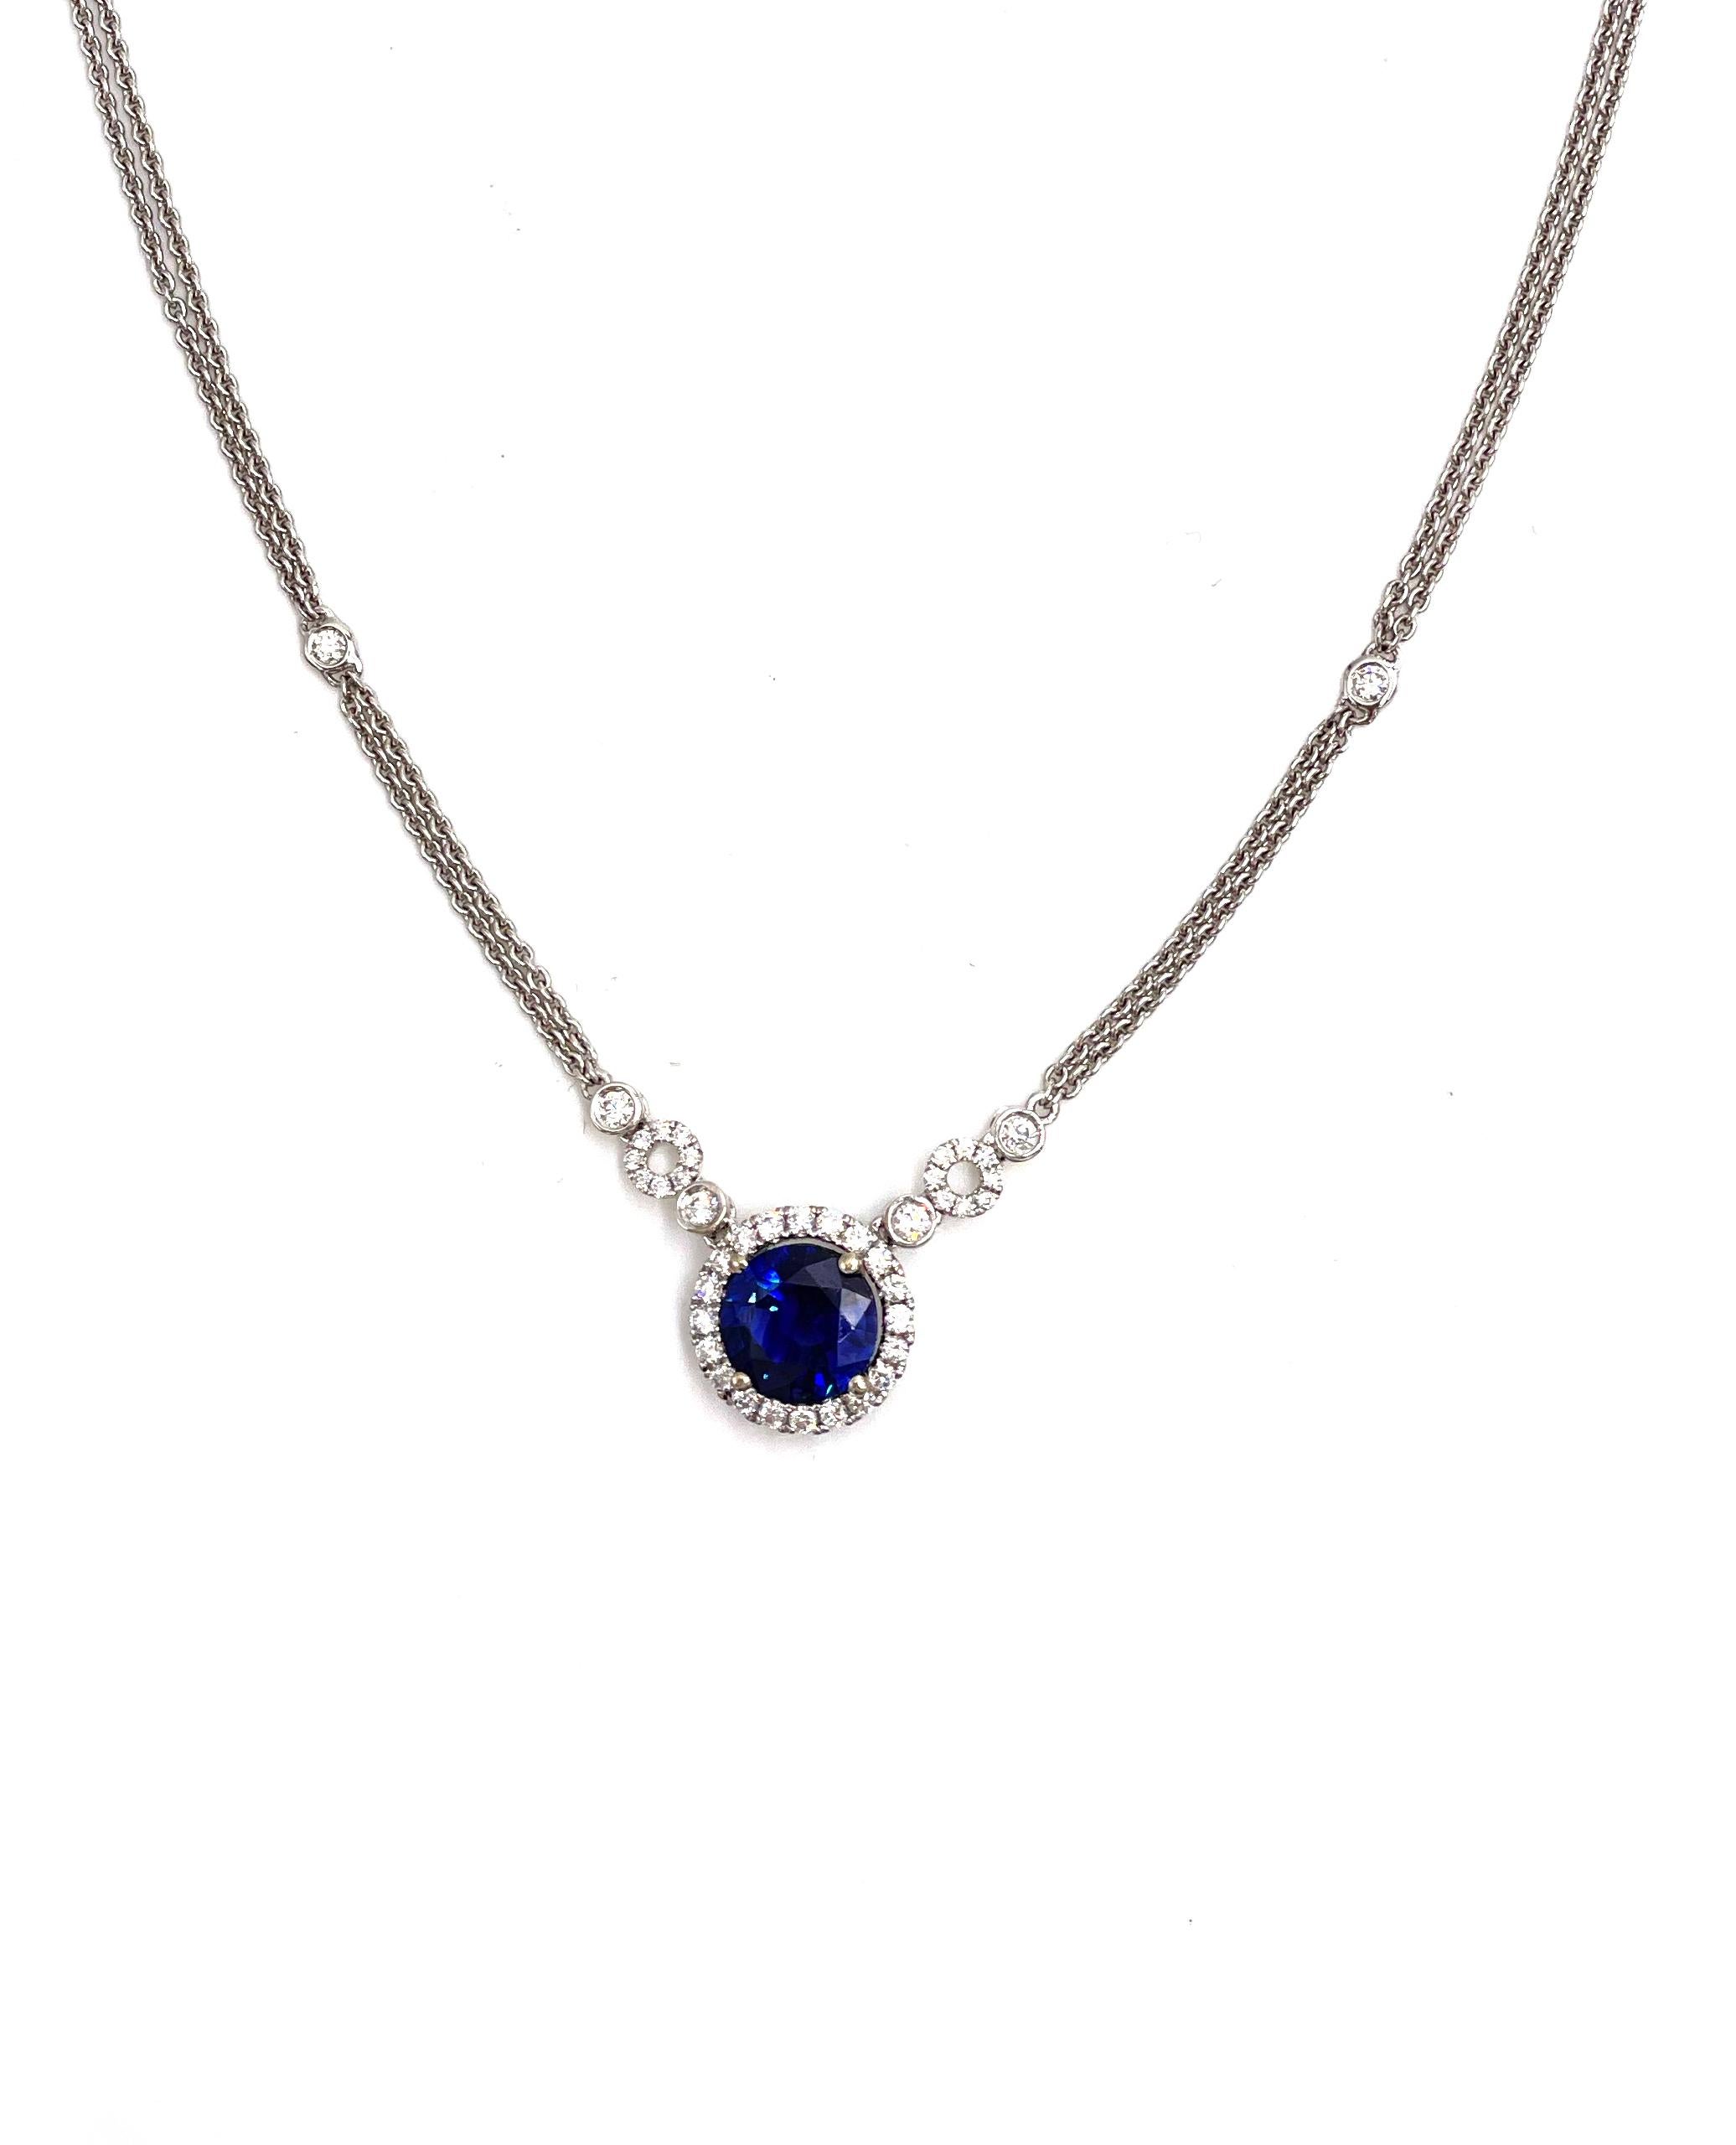 18K white gold double chain halo necklace with accented diamonds on the chain. There are a total of 42 round brilliant-cut diamonds weighing 0.46 carats total weight. In the center there is one round faceted blue sapphire weighing 2.15 carats.

*